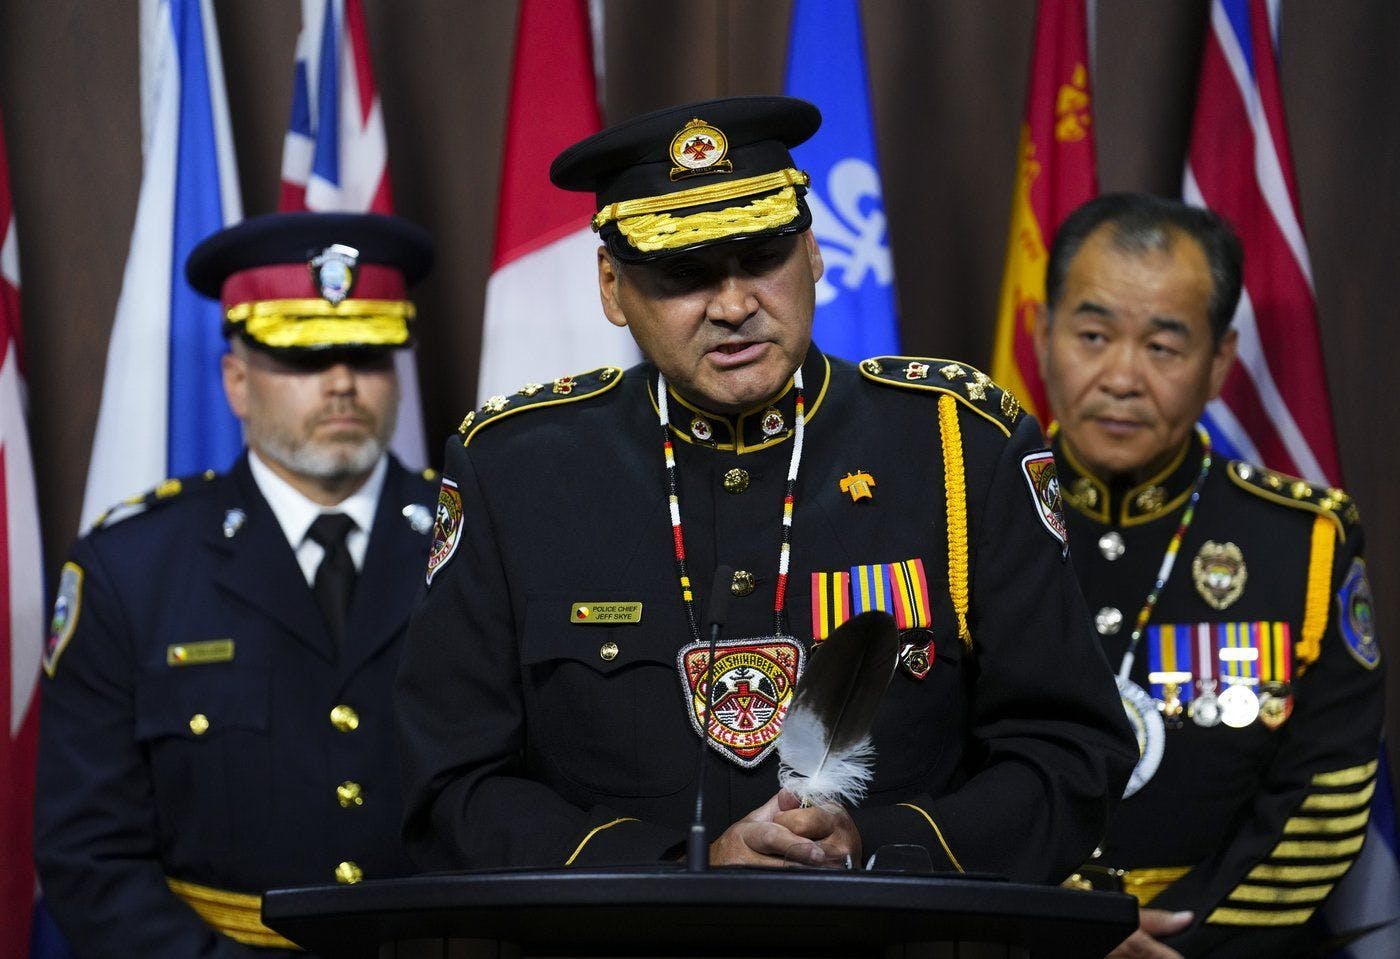 Recognition of First Nations rights a 'sticking' point in new policing law plan: AFN